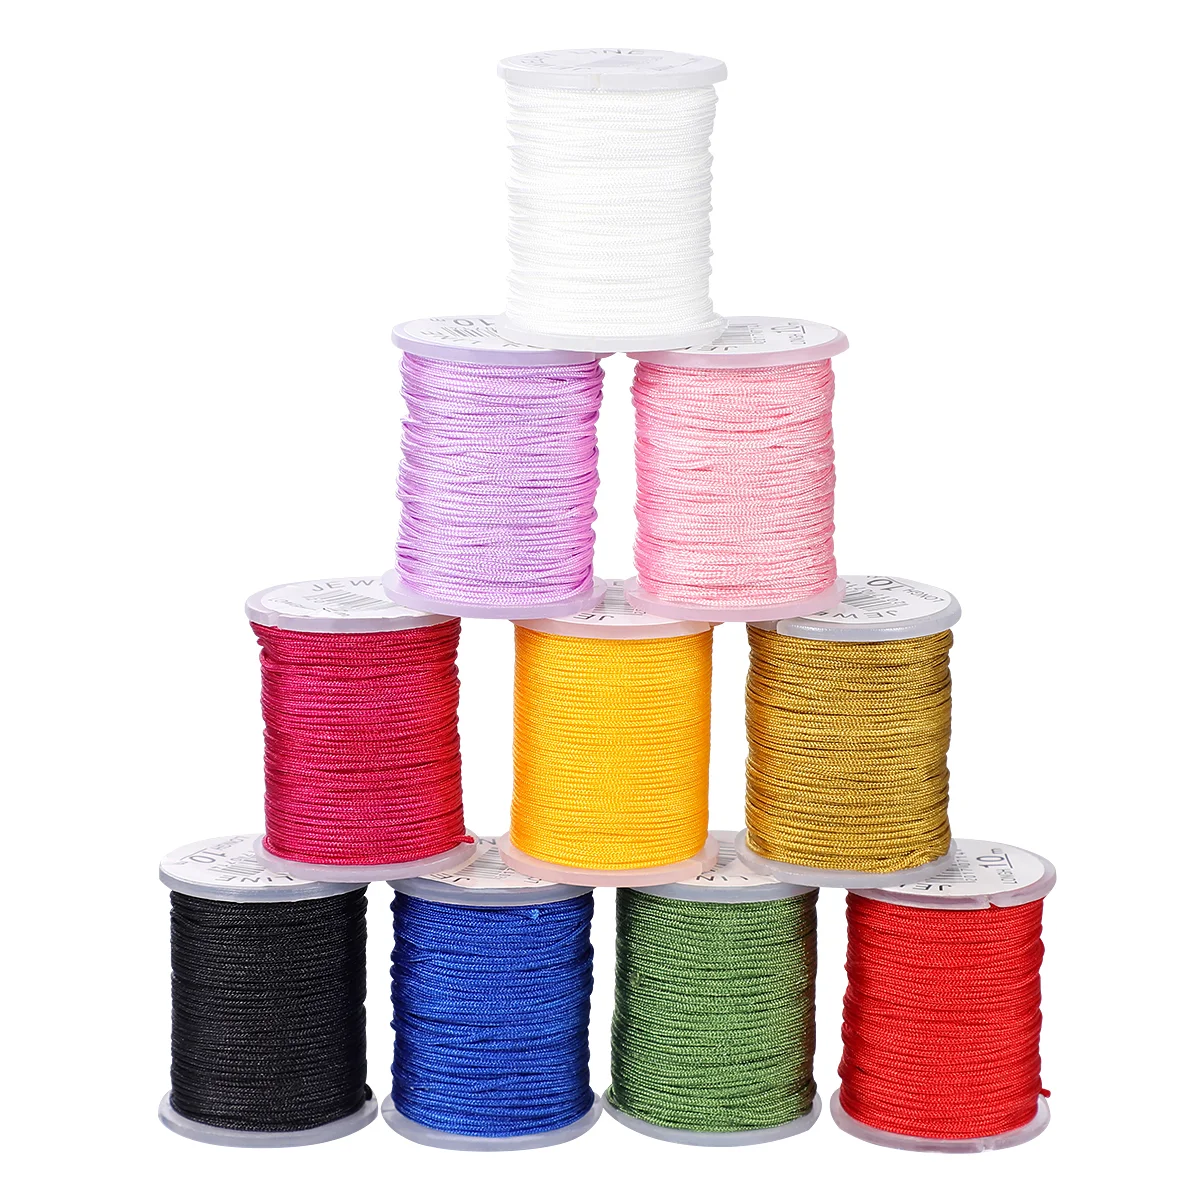 

Chinese Beading Cord Knotting Jewellery Making Thread Hand Knitting Charming Necklace